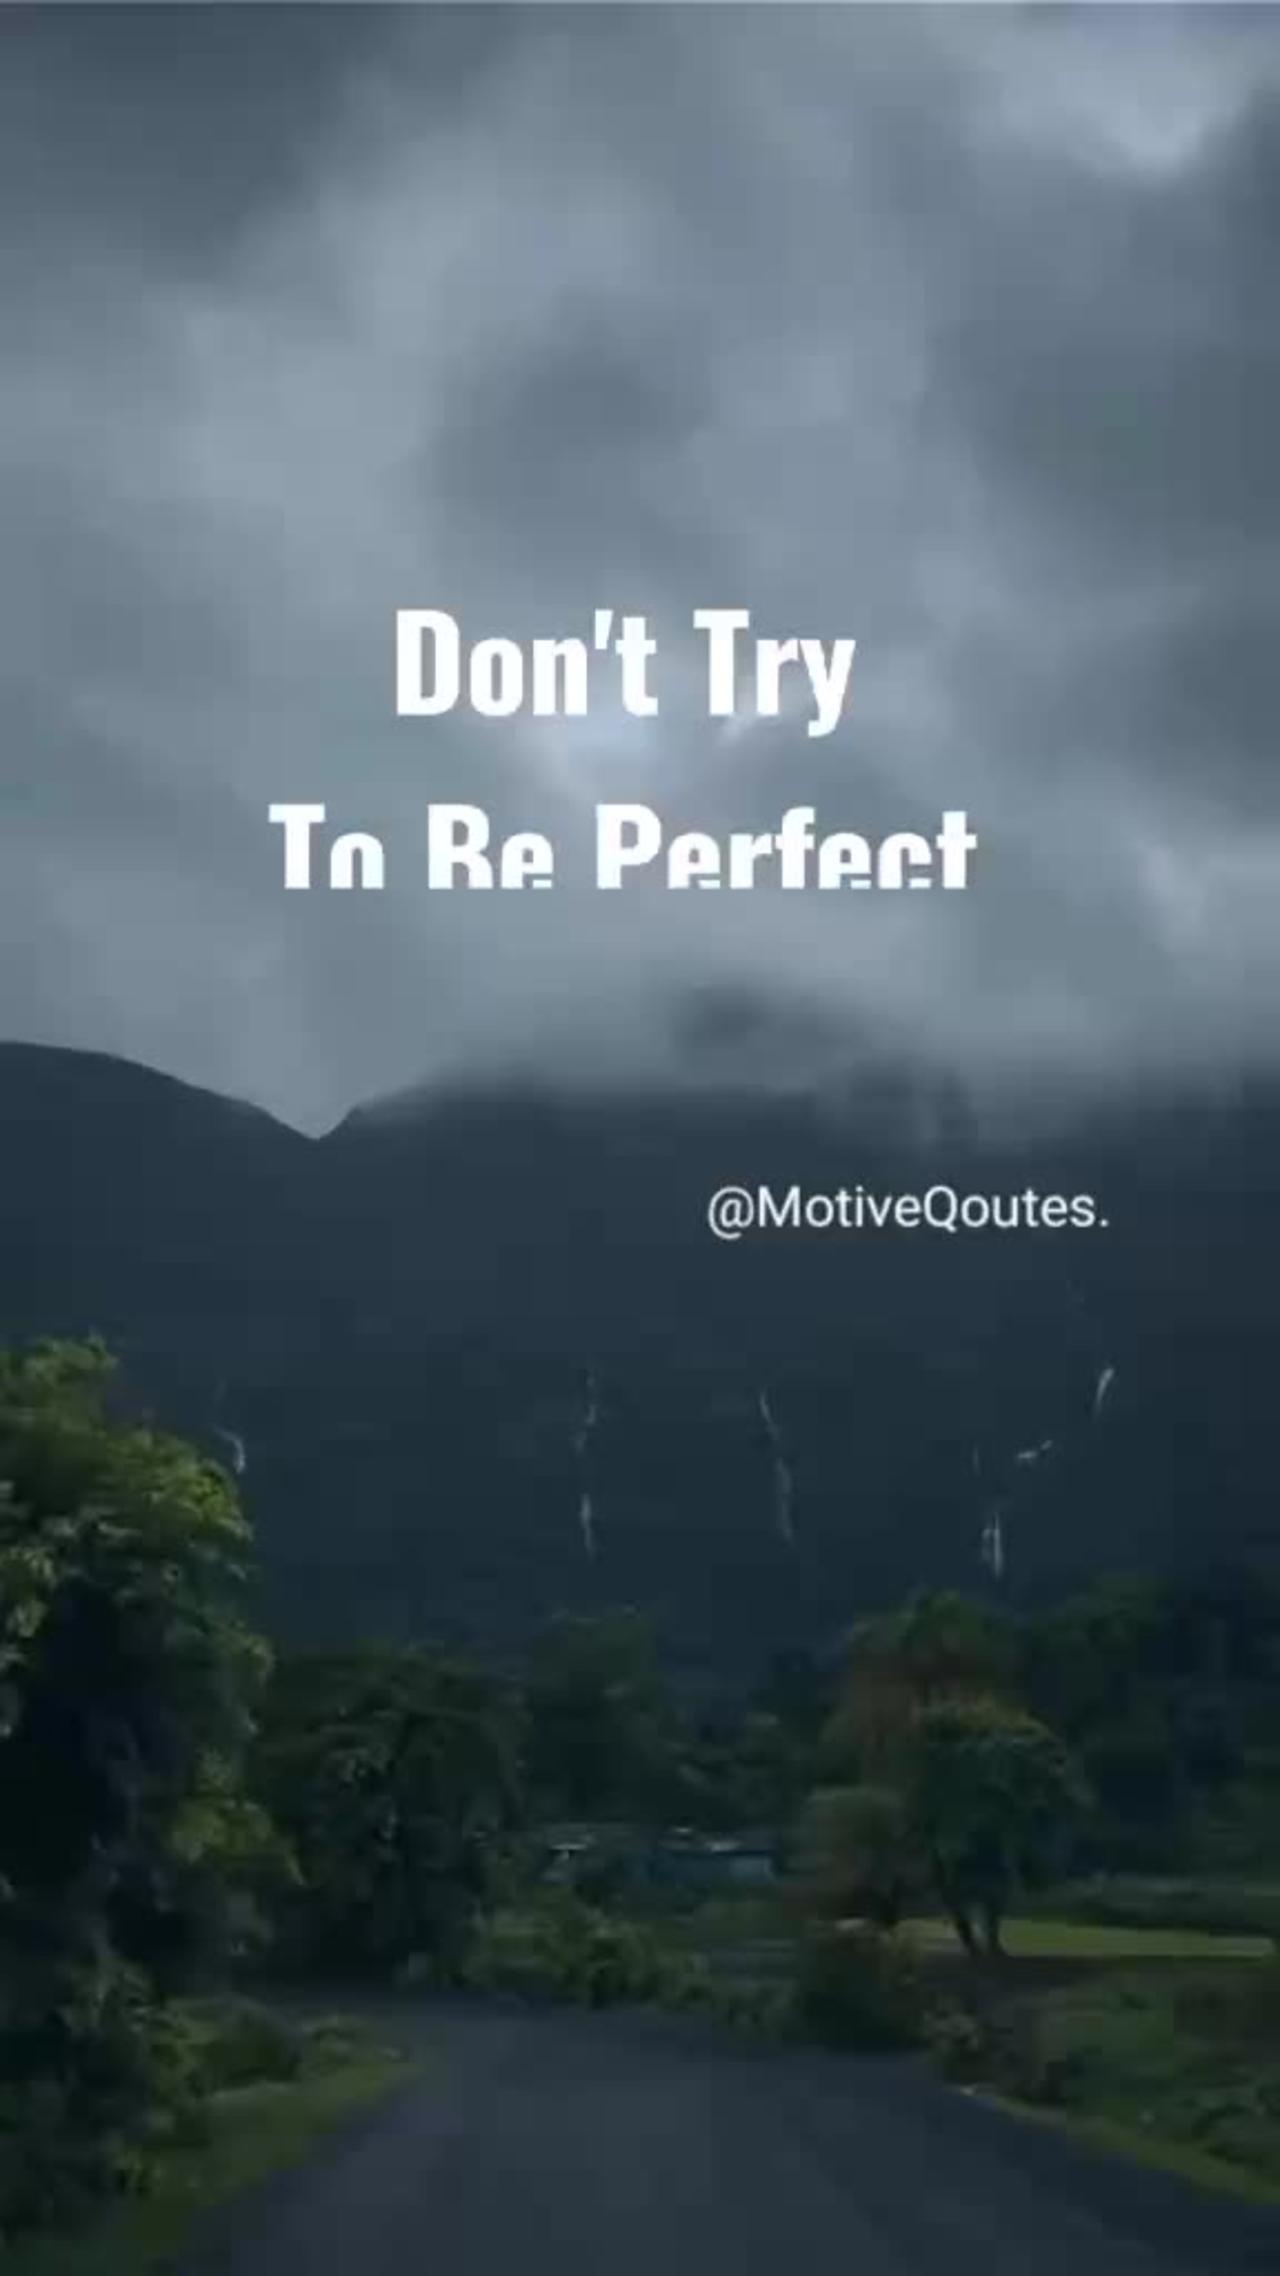 Don't try to perfect #Motivation @MotiveQoutes.